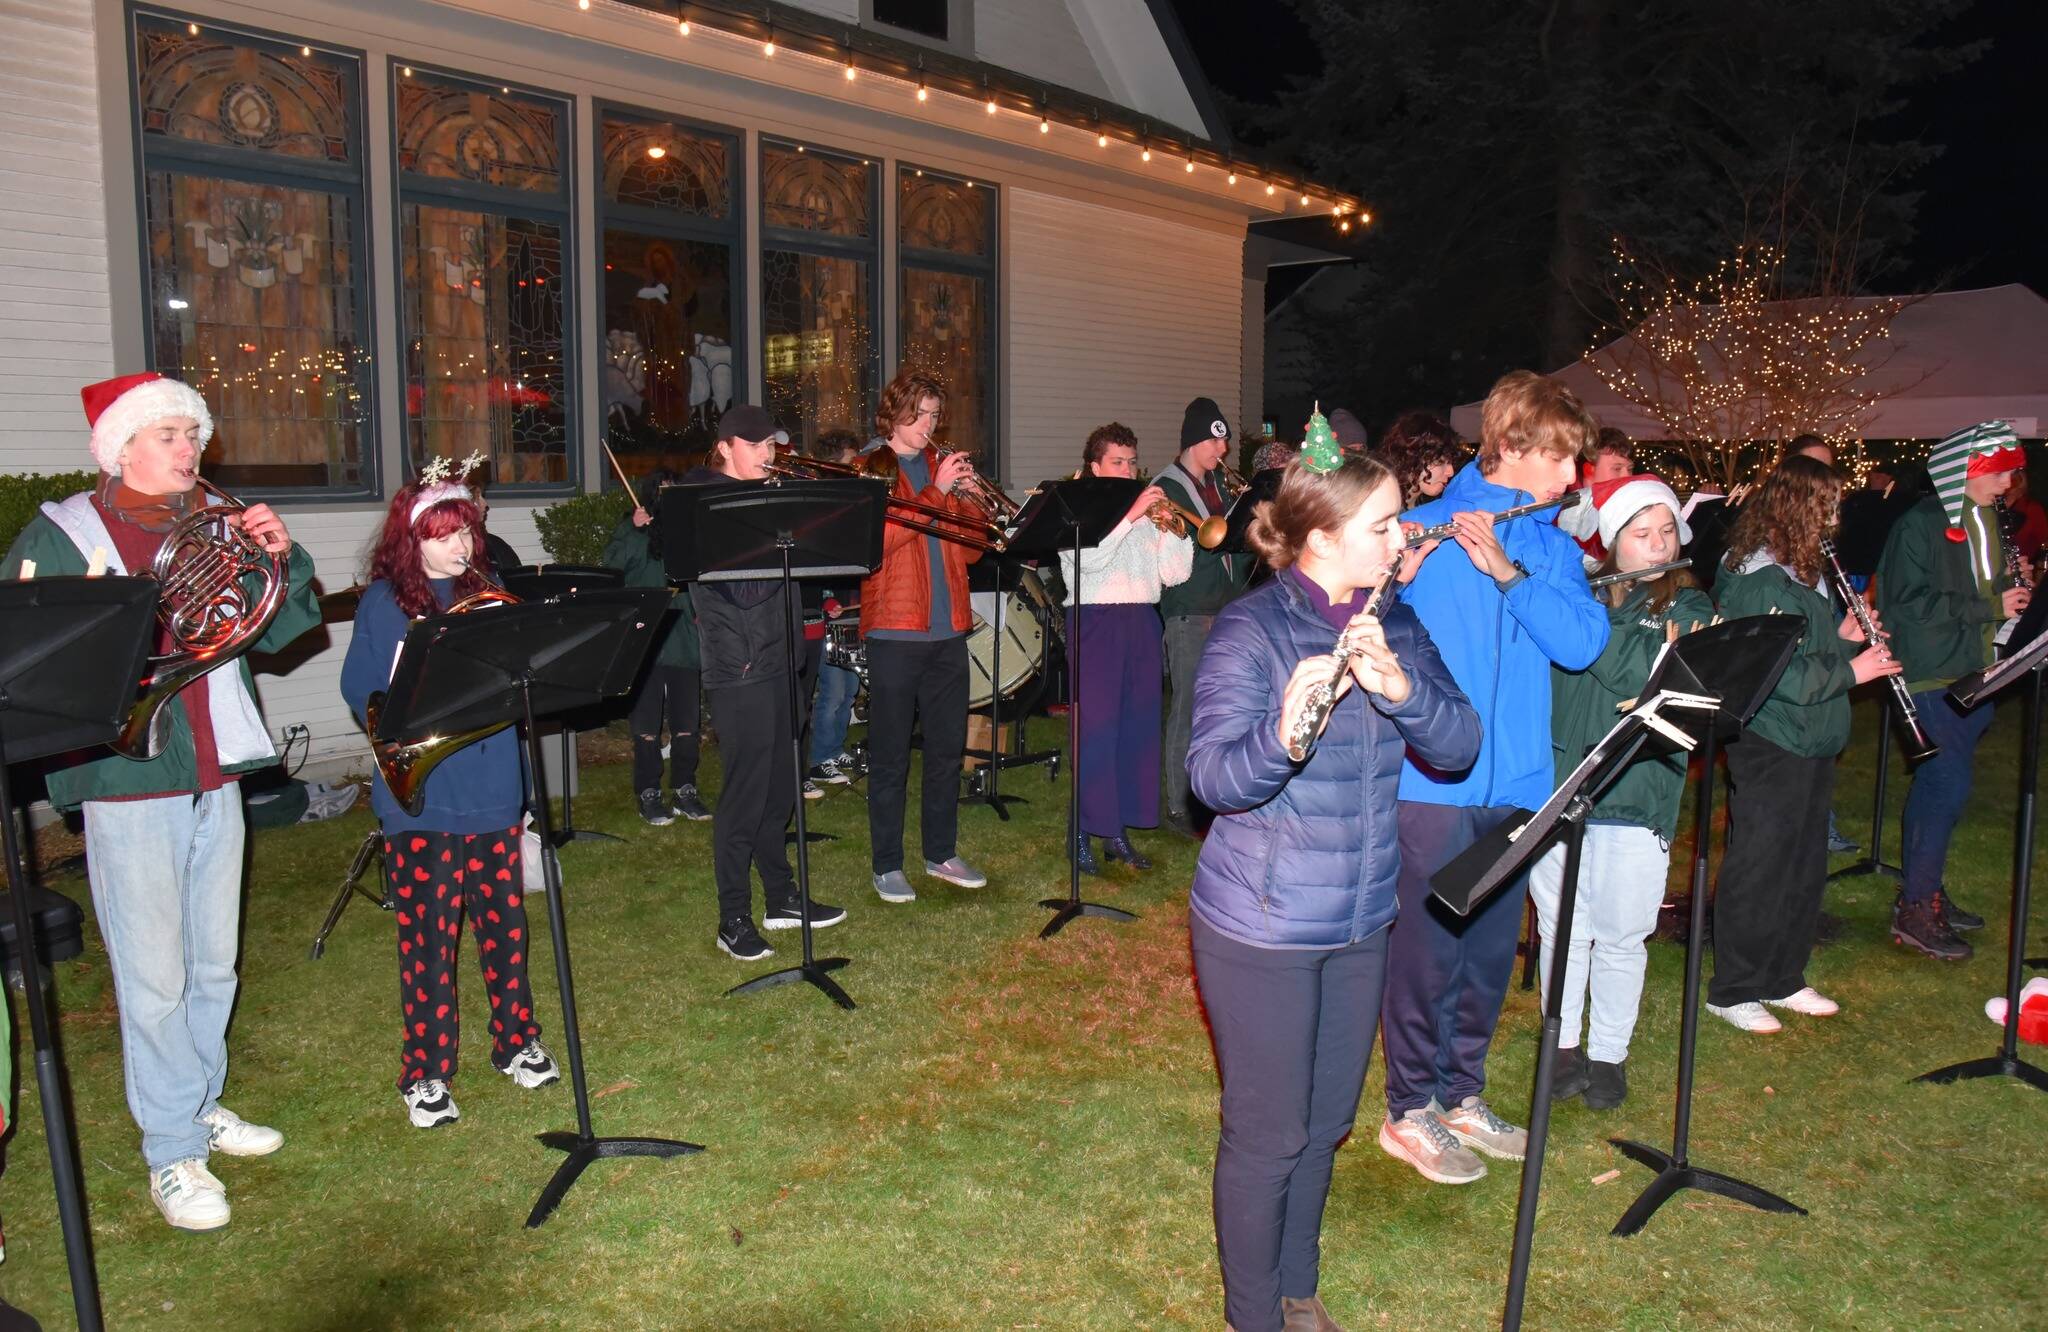 Jim Diers photo
The Vashon High School band plays for the crowd during WinterFest.